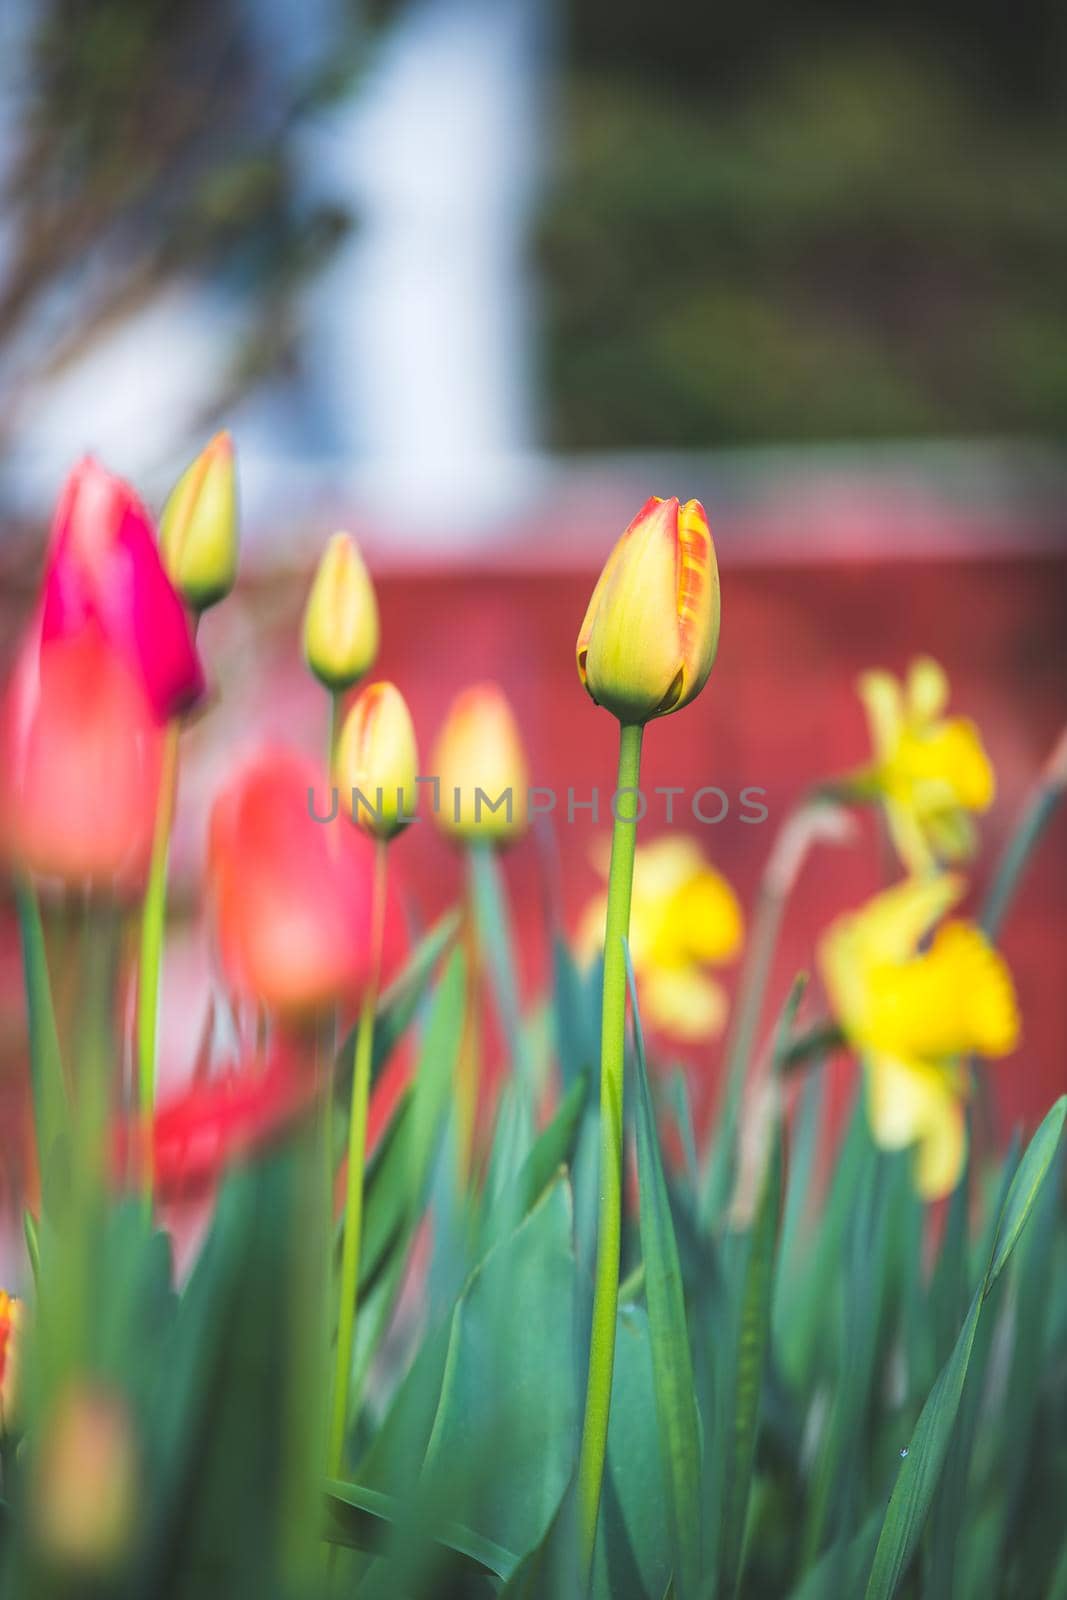 Beautiful spring time flower scenery with colorful blossoms and tulips